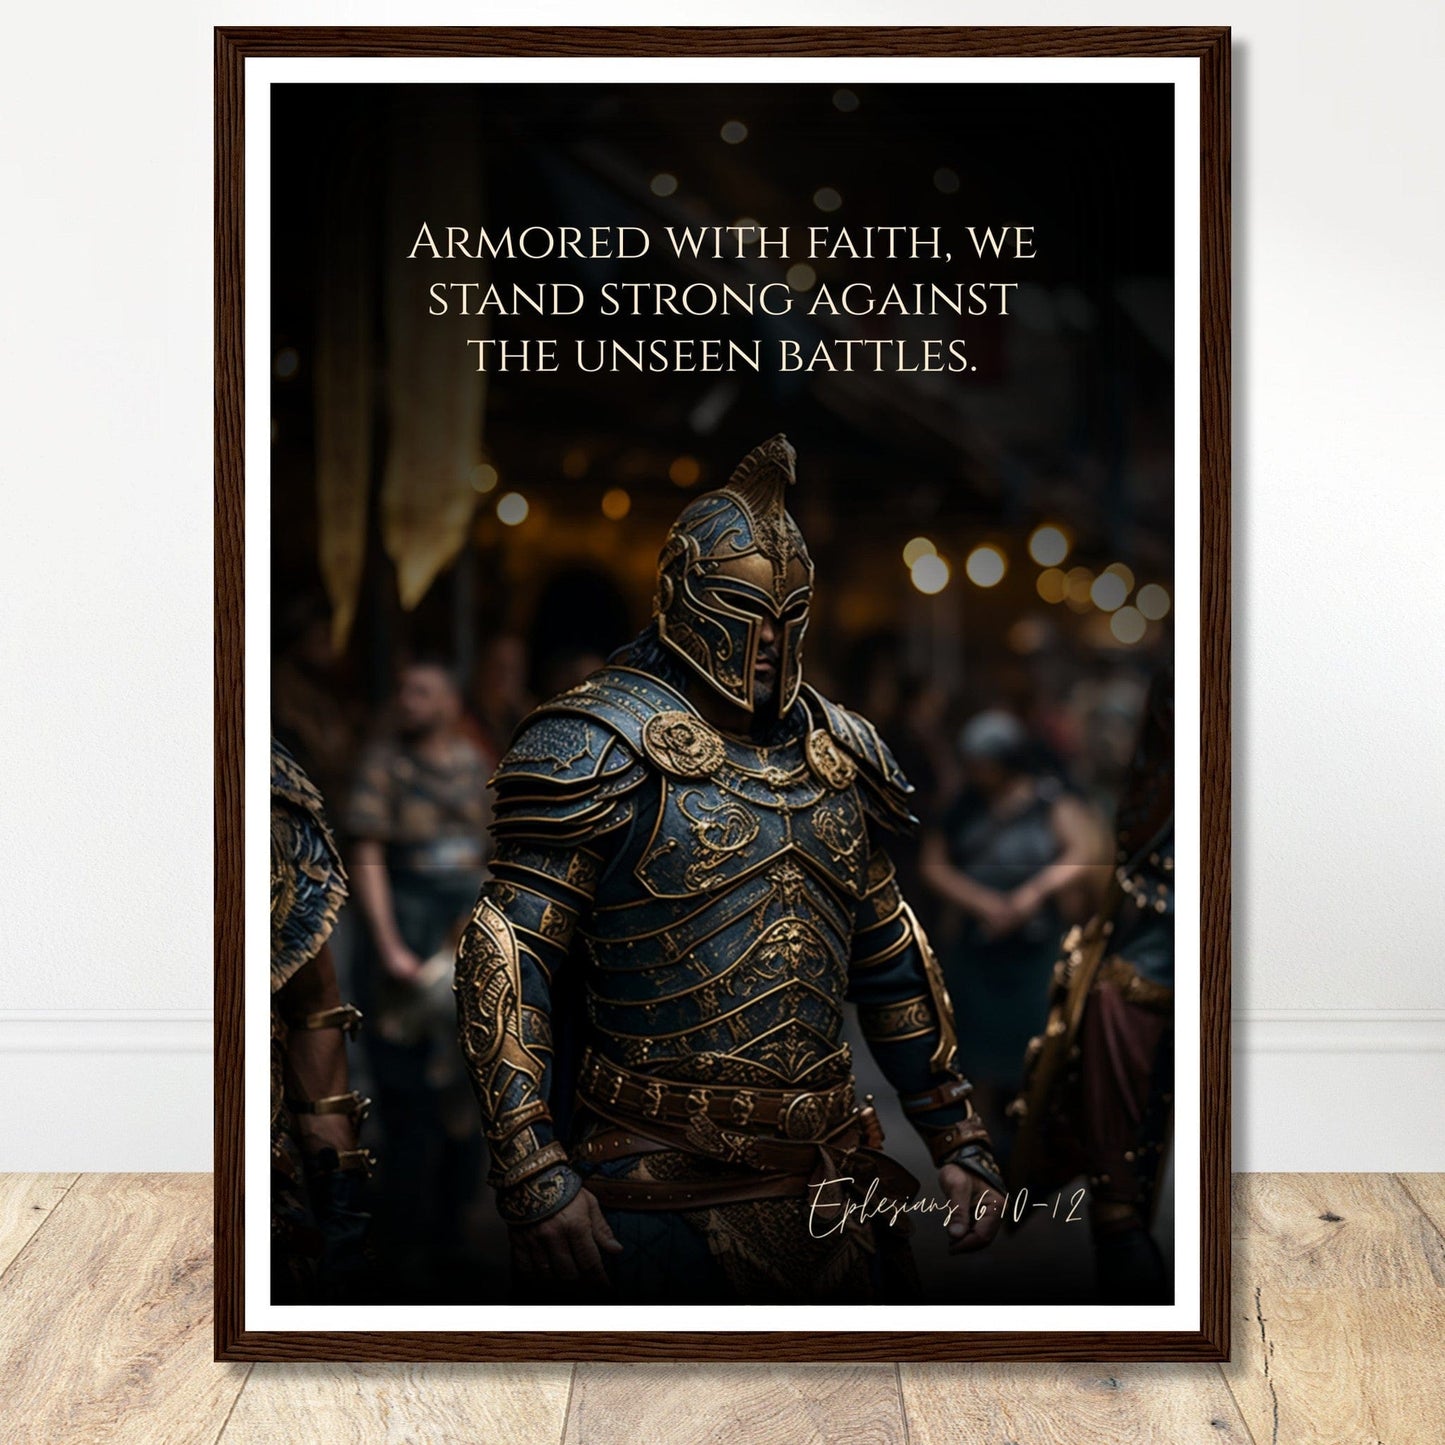 Coffee With My Father Print Material 45x60 cm / 18x24″ / Premium Matte Paper Wooden Framed Poster / Dark wood frame The Unseen Battles: Ephesians 6:10-12 - Artwork